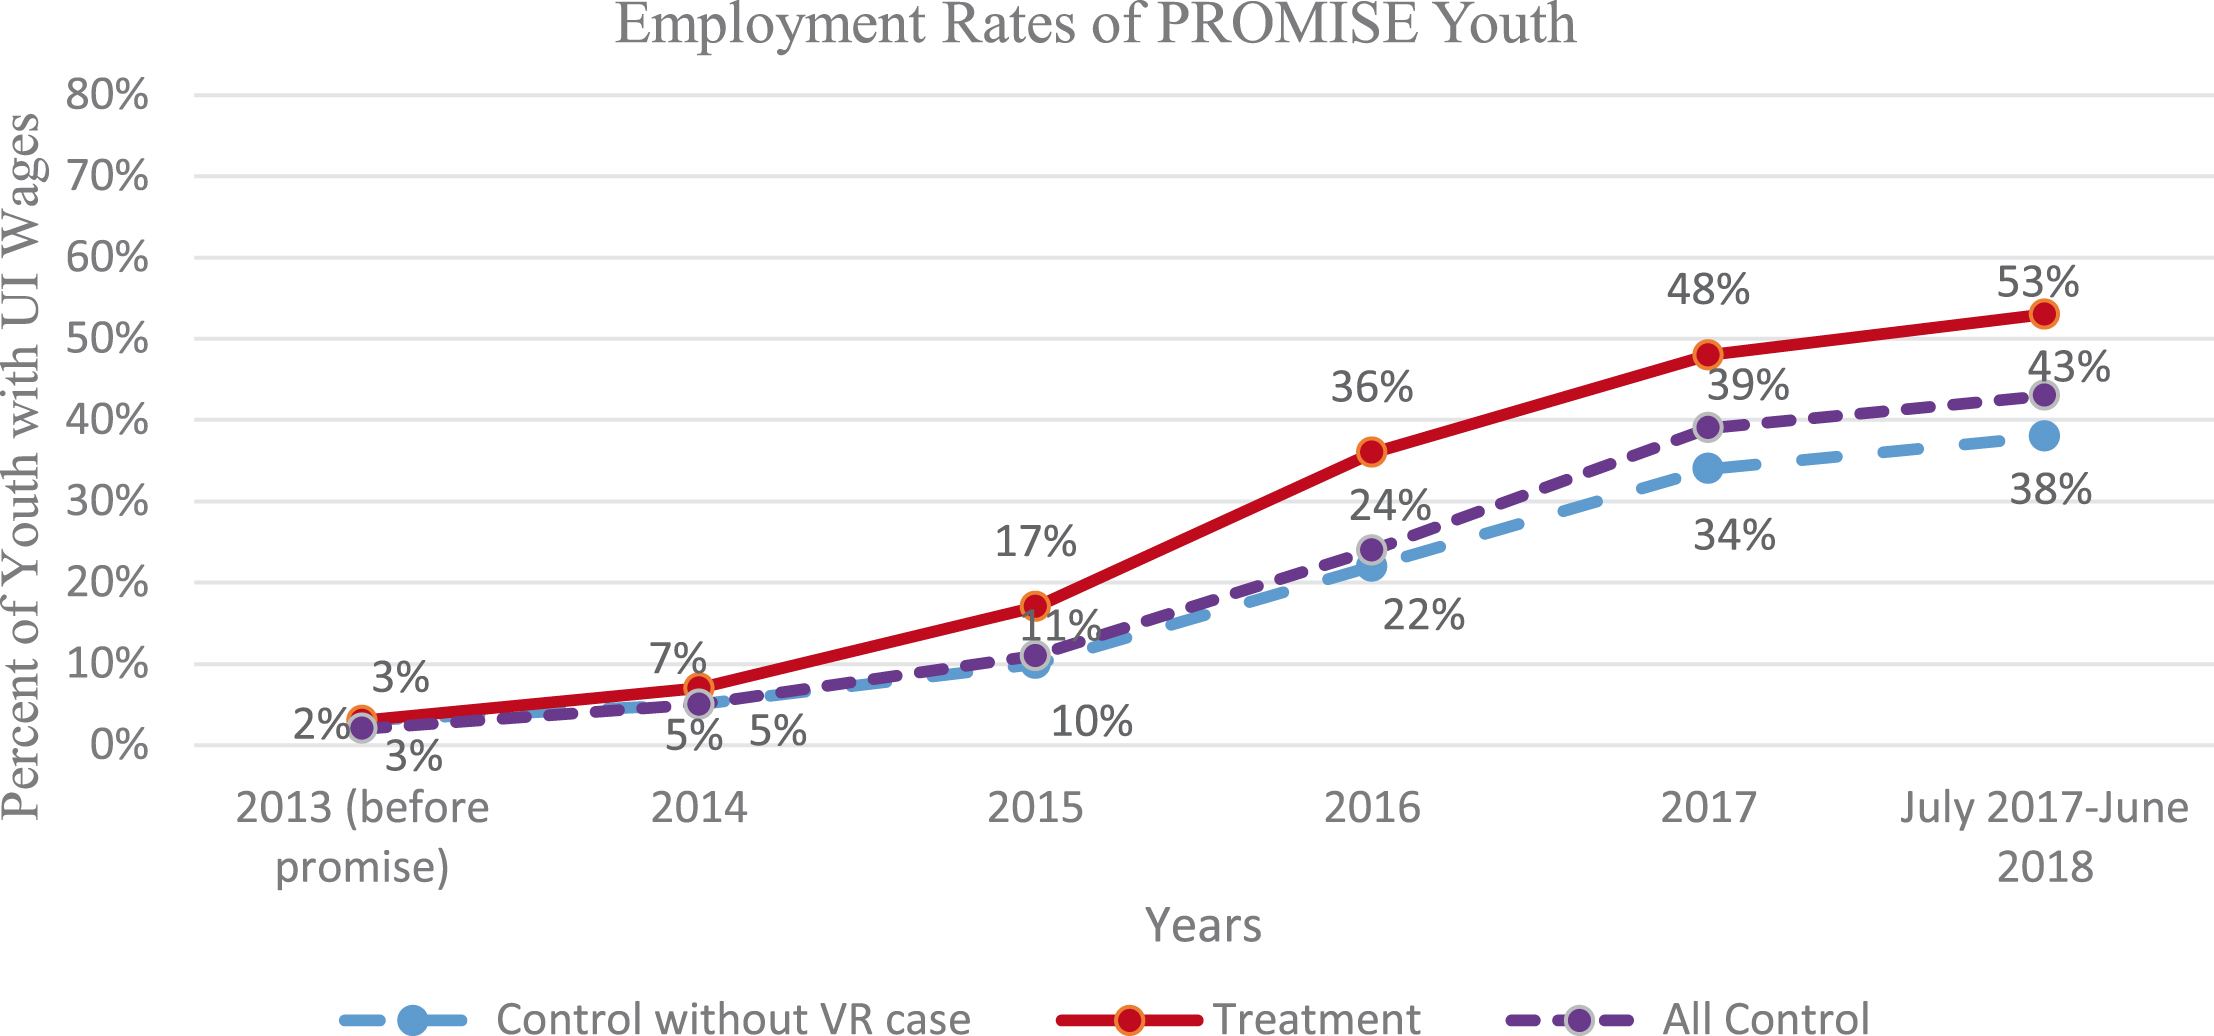 Employment Rates of Wisconsin PROMISE Youth Between July 2017 and June 2018.